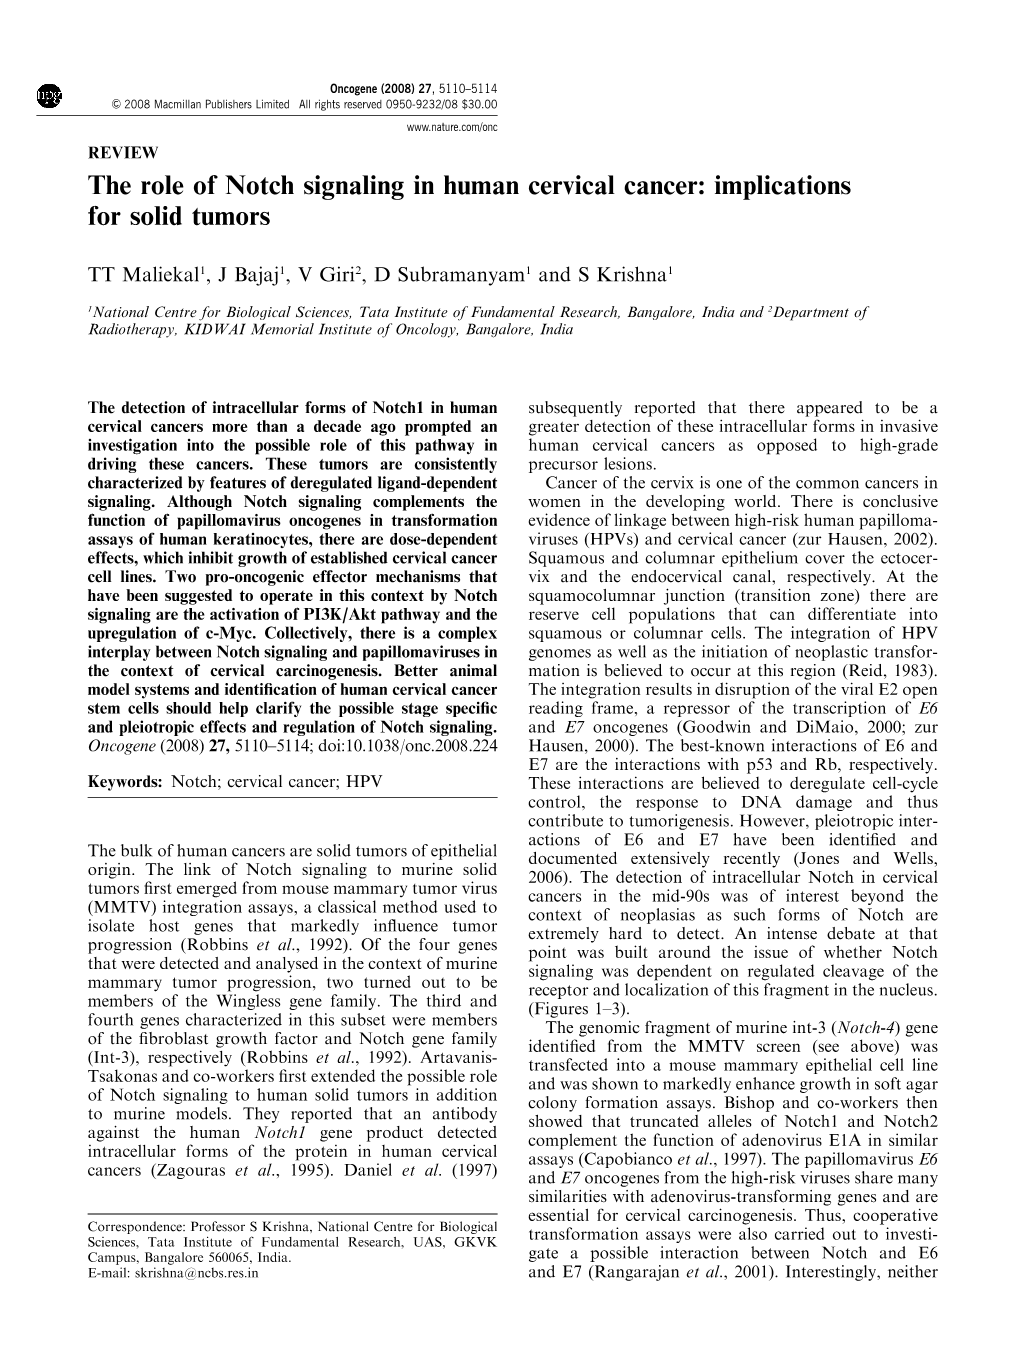 The Role of Notch Signaling in Human Cervical Cancer: Implications for Solid Tumors